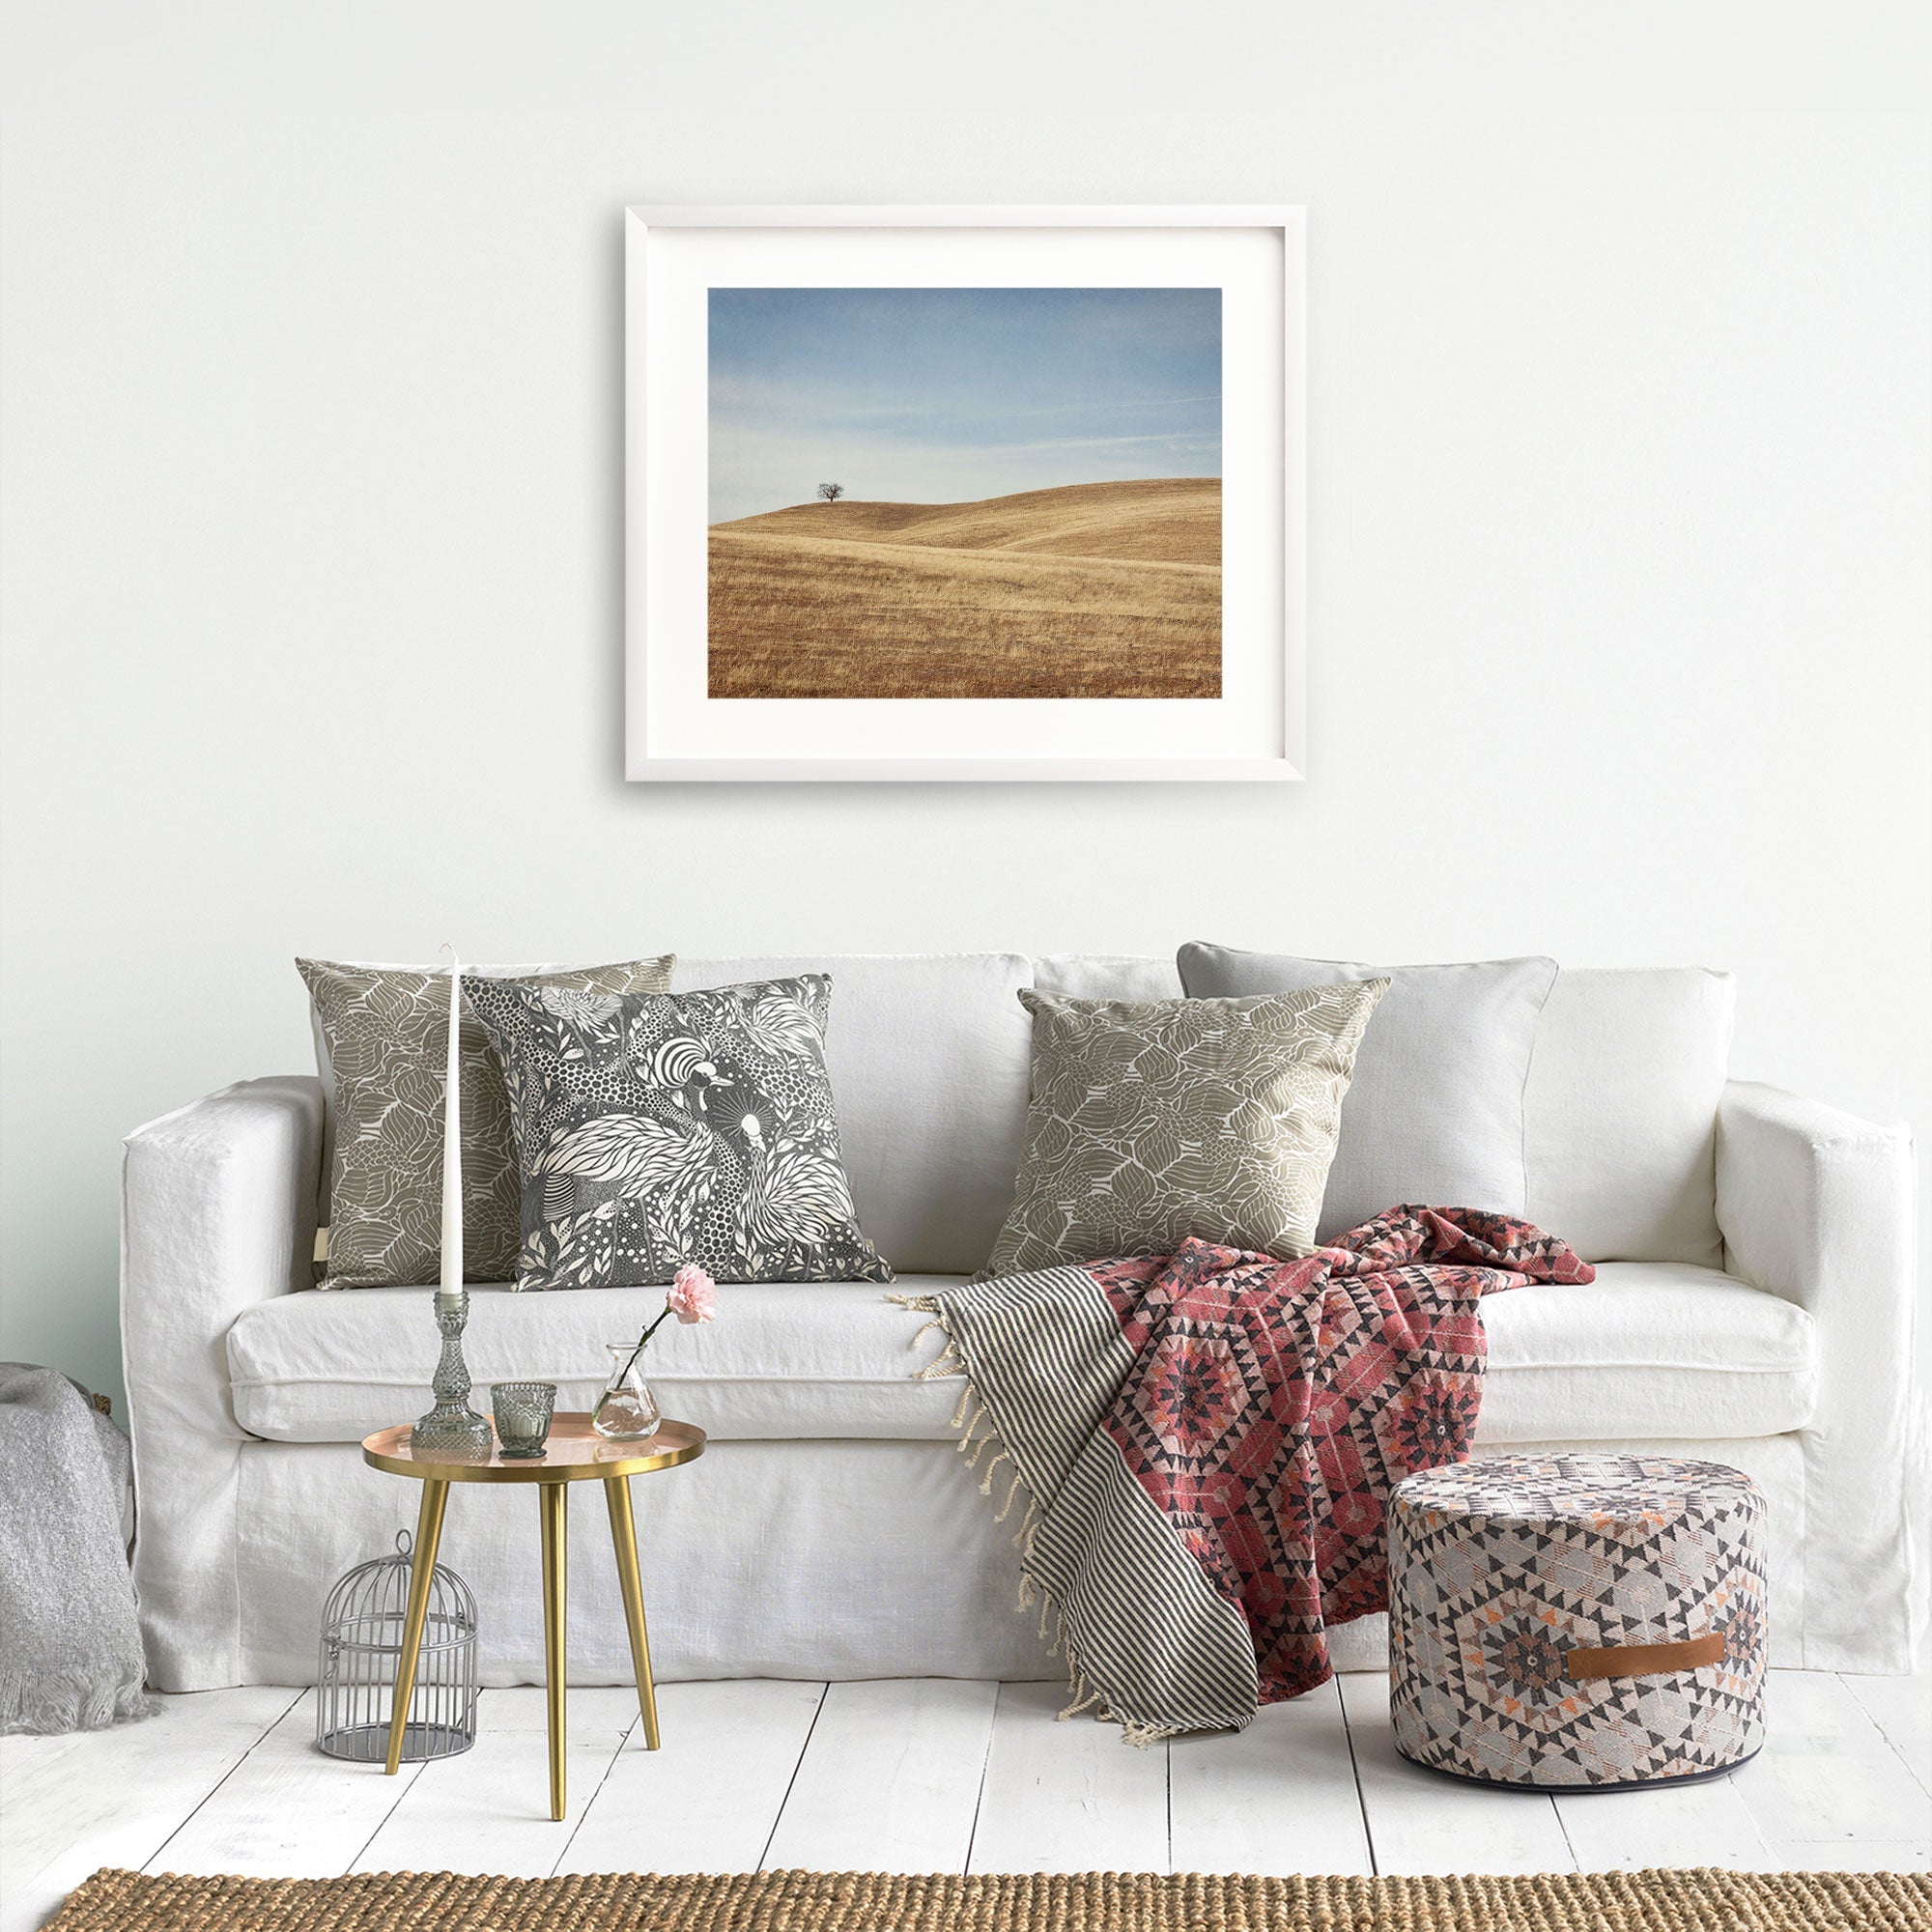 A cozy living room setup featuring a white sofa with decorative pillows, a glass side table, Offley Green California Central Coast Landscape Print 'Golden Ynez' on the wall, a red patterned throw blanket, and